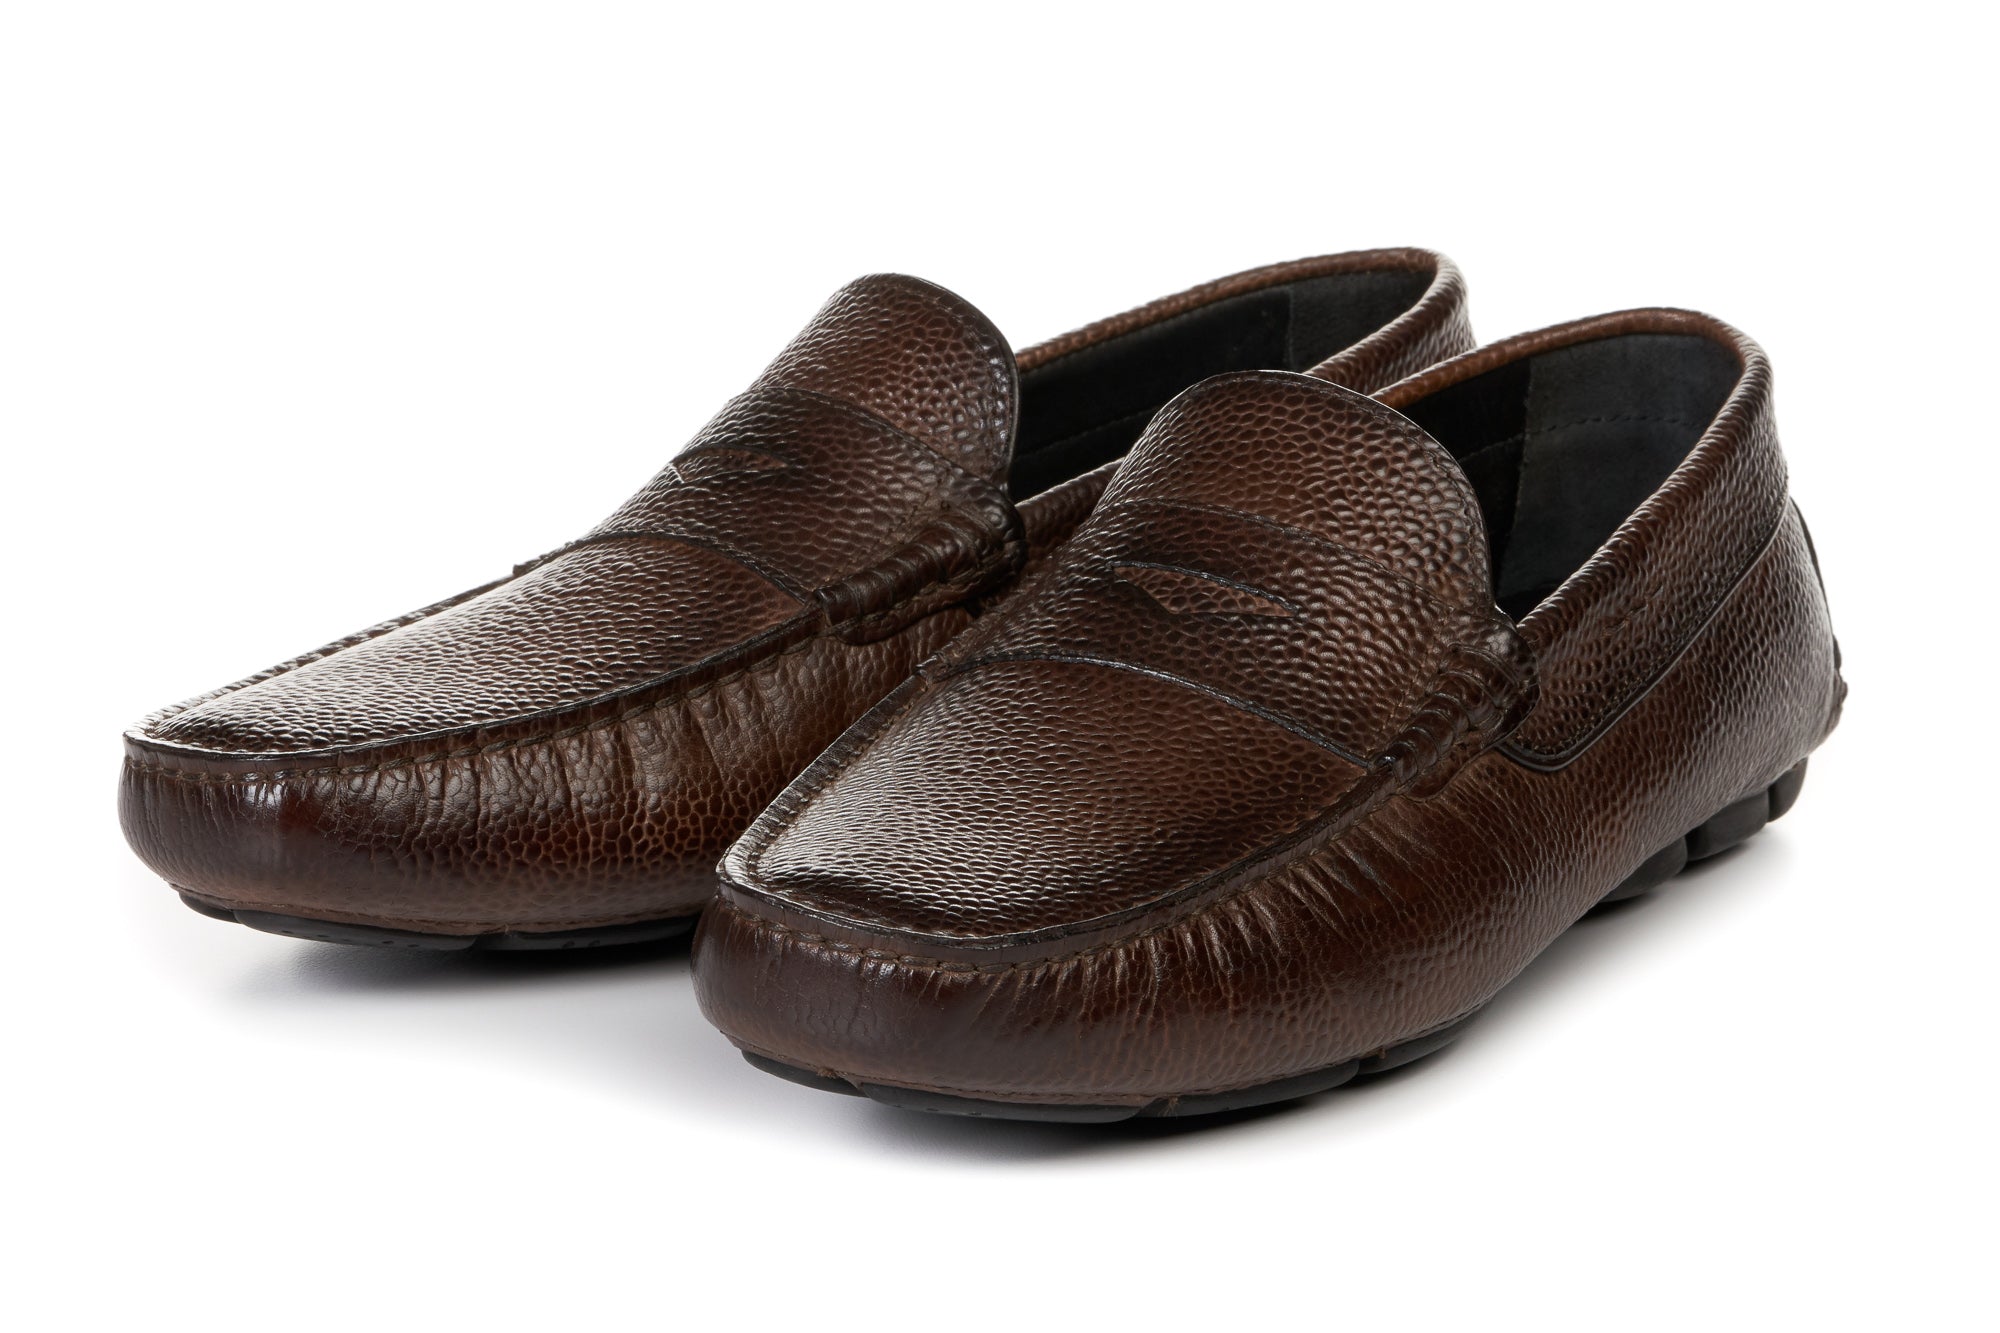 The McQueen Driving Loafer - Brown - Pebbled Leather